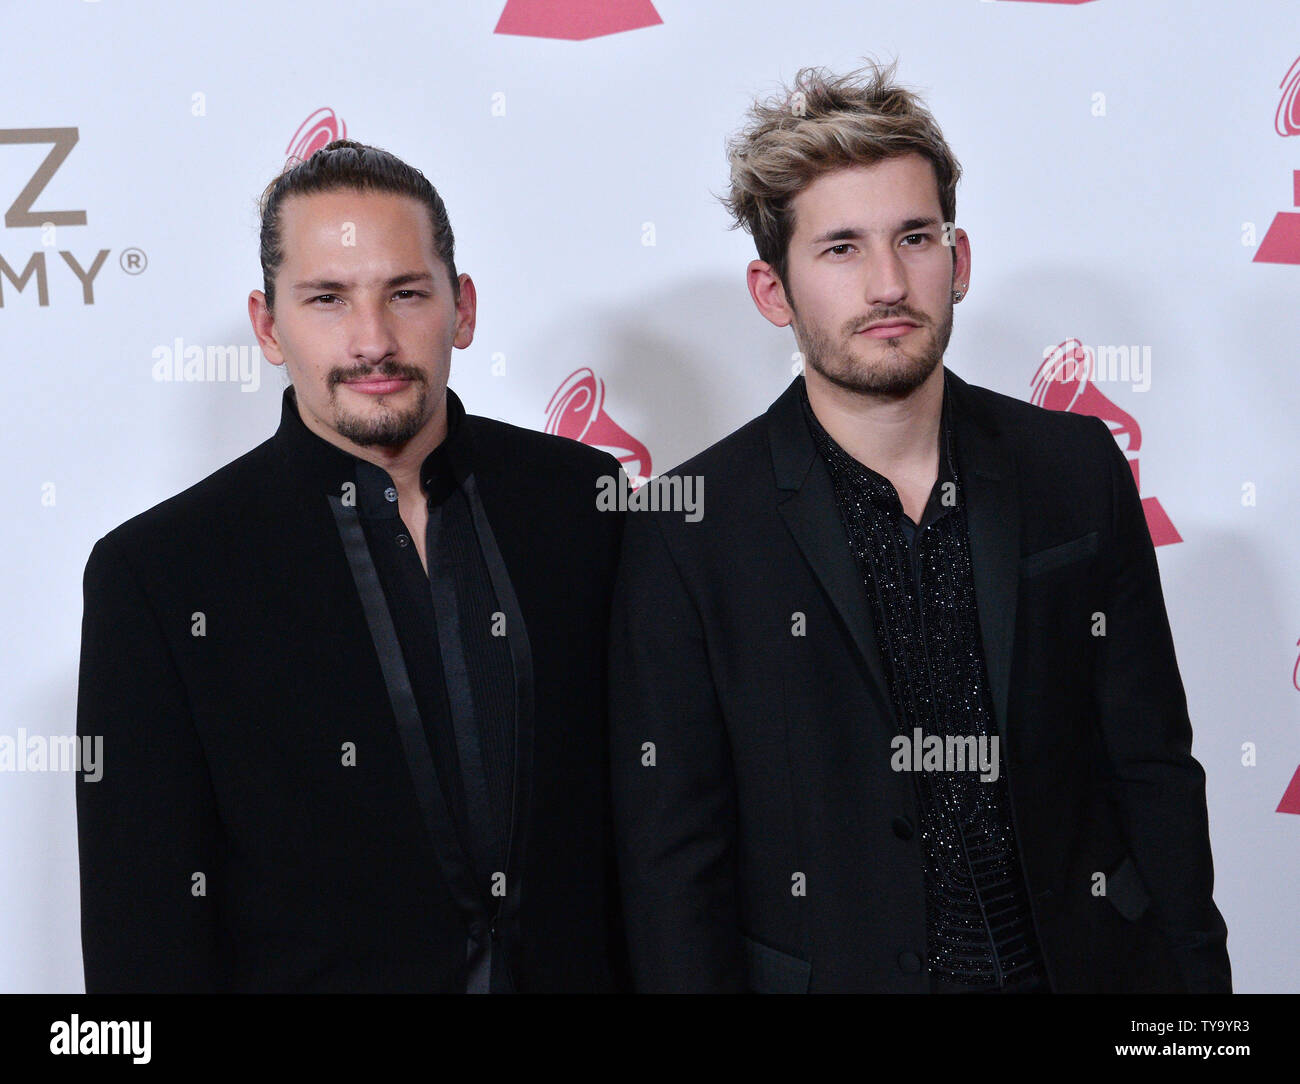 Musical group Mau y Ricky attends the Latin Grammy Person of the Year gala honoring Sanz at the Mandalay Bay Convention Center in Las Vegas, Nevada on November 15, 2017.   Photo by Jim Ruymen/UPI Stock Photo